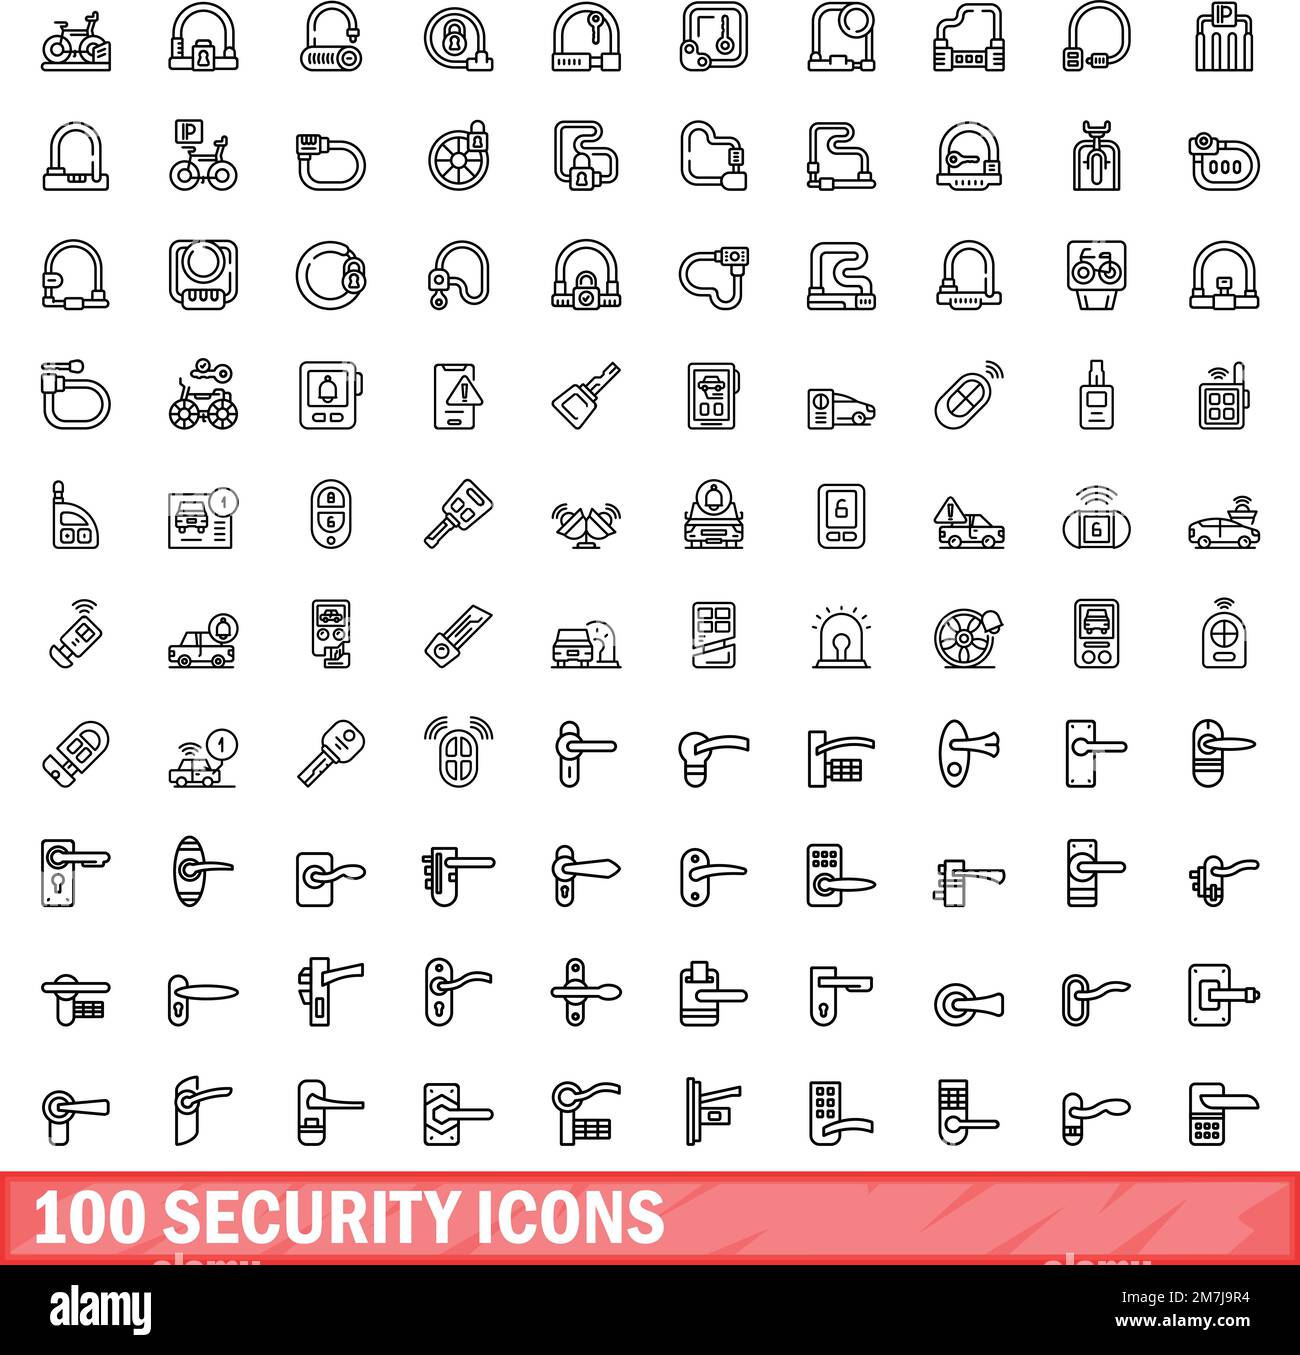 100 security icons set. Outline illustration of 100 security icons vector set isolated on white background Stock Vector